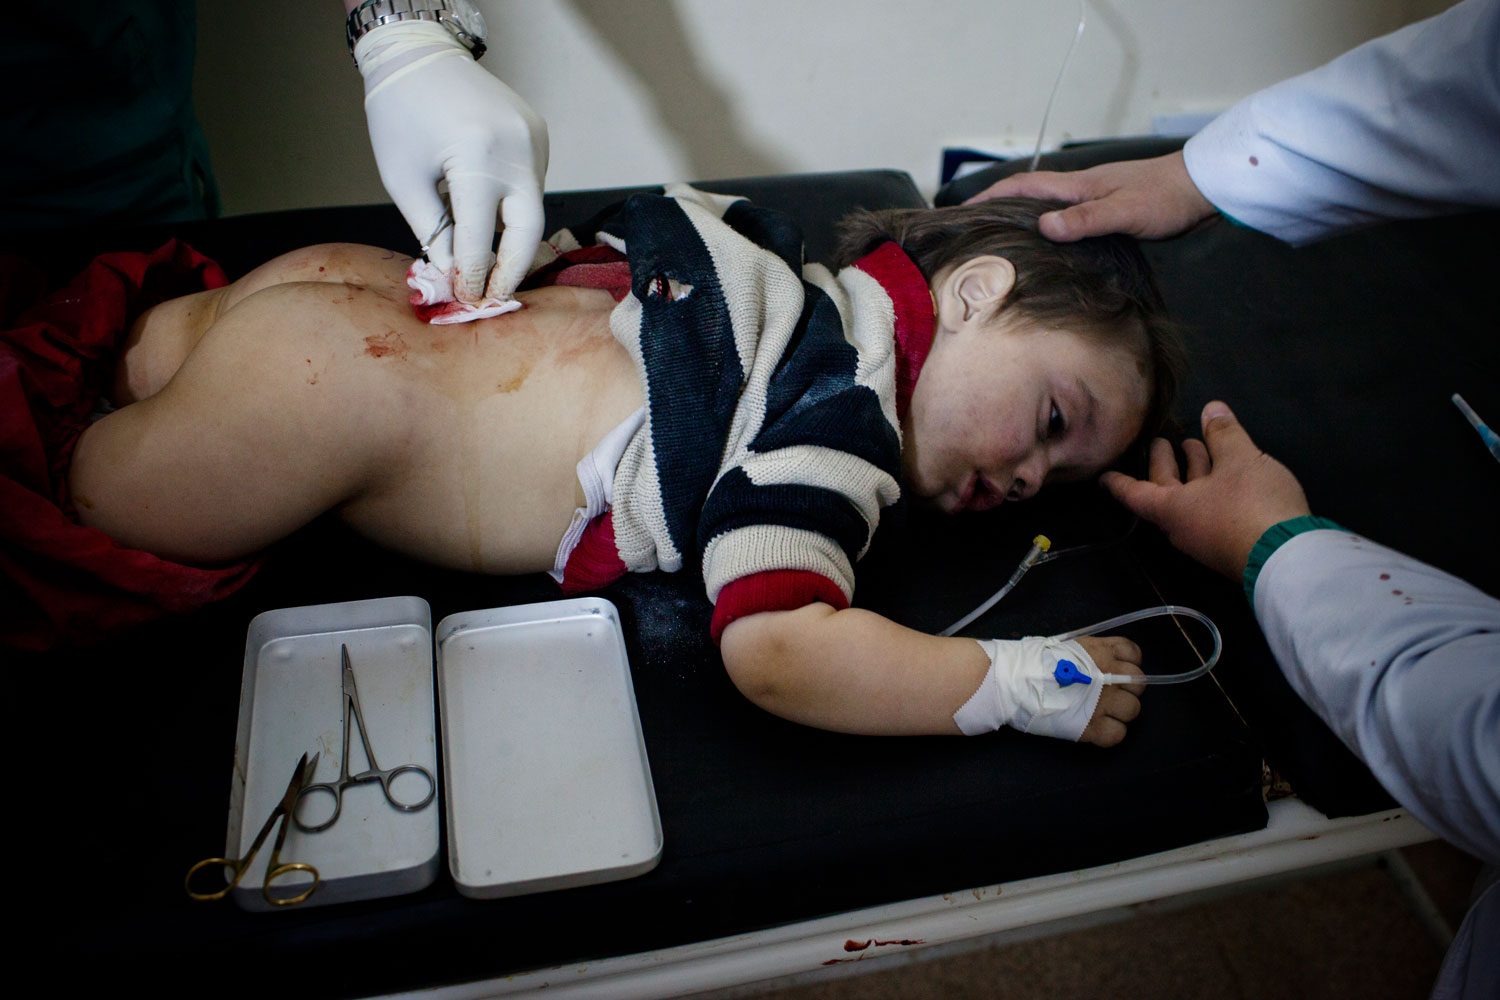 Feb. 24, 2012. A baby wounded by a mortar attack at the Bab Amr clinic. The boy died a few days later.